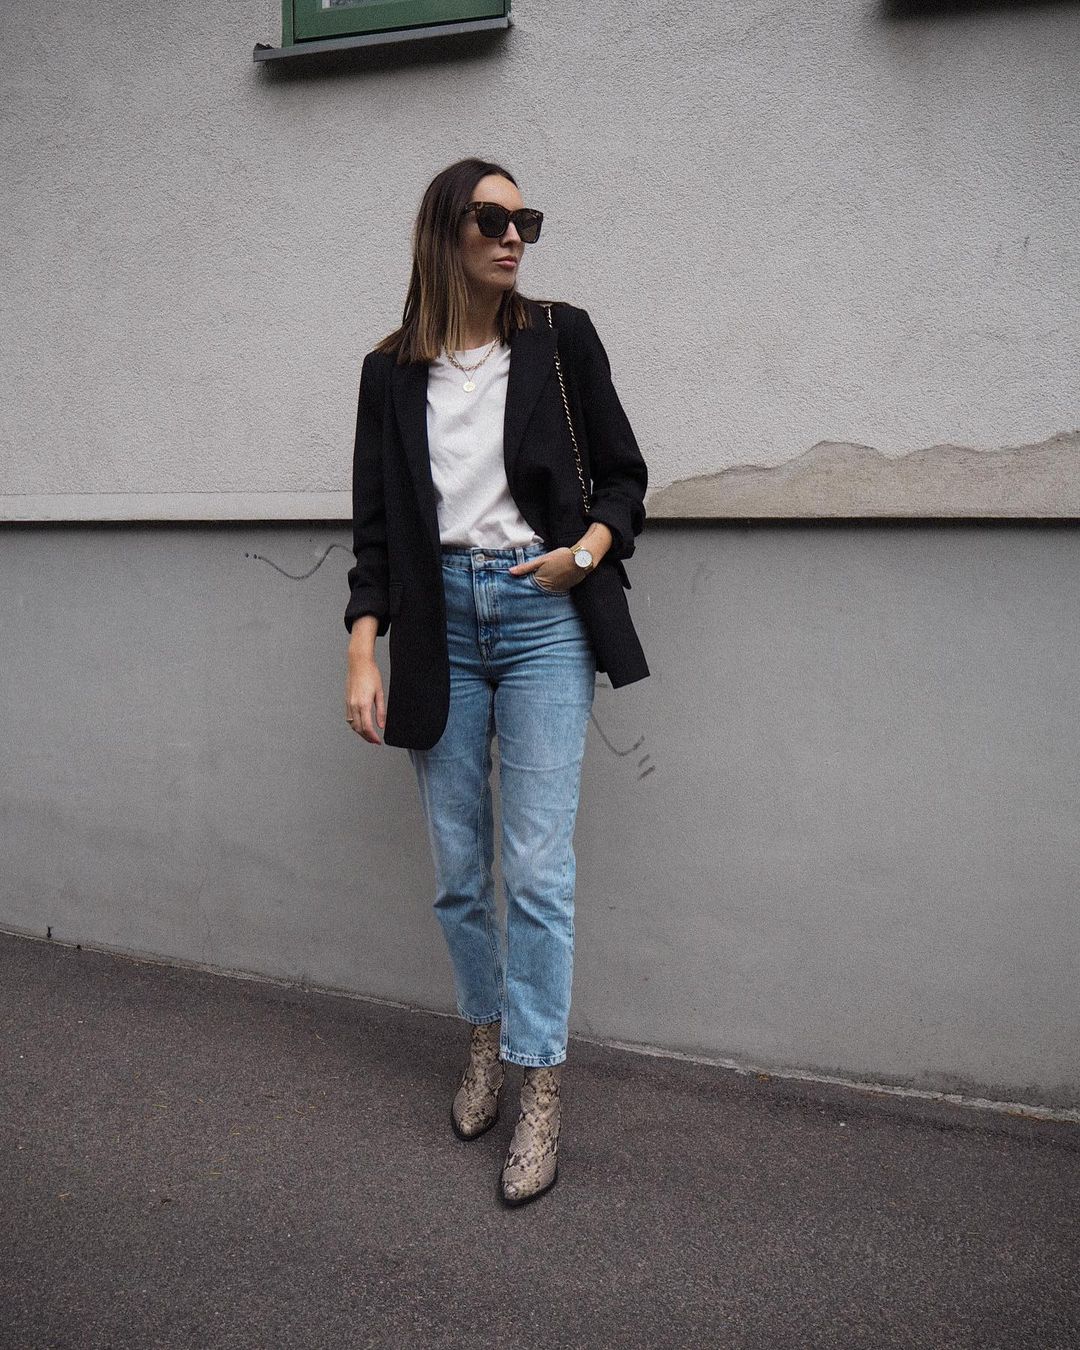 This Casual-Chic Outfit Checks All the Boxes for Fall